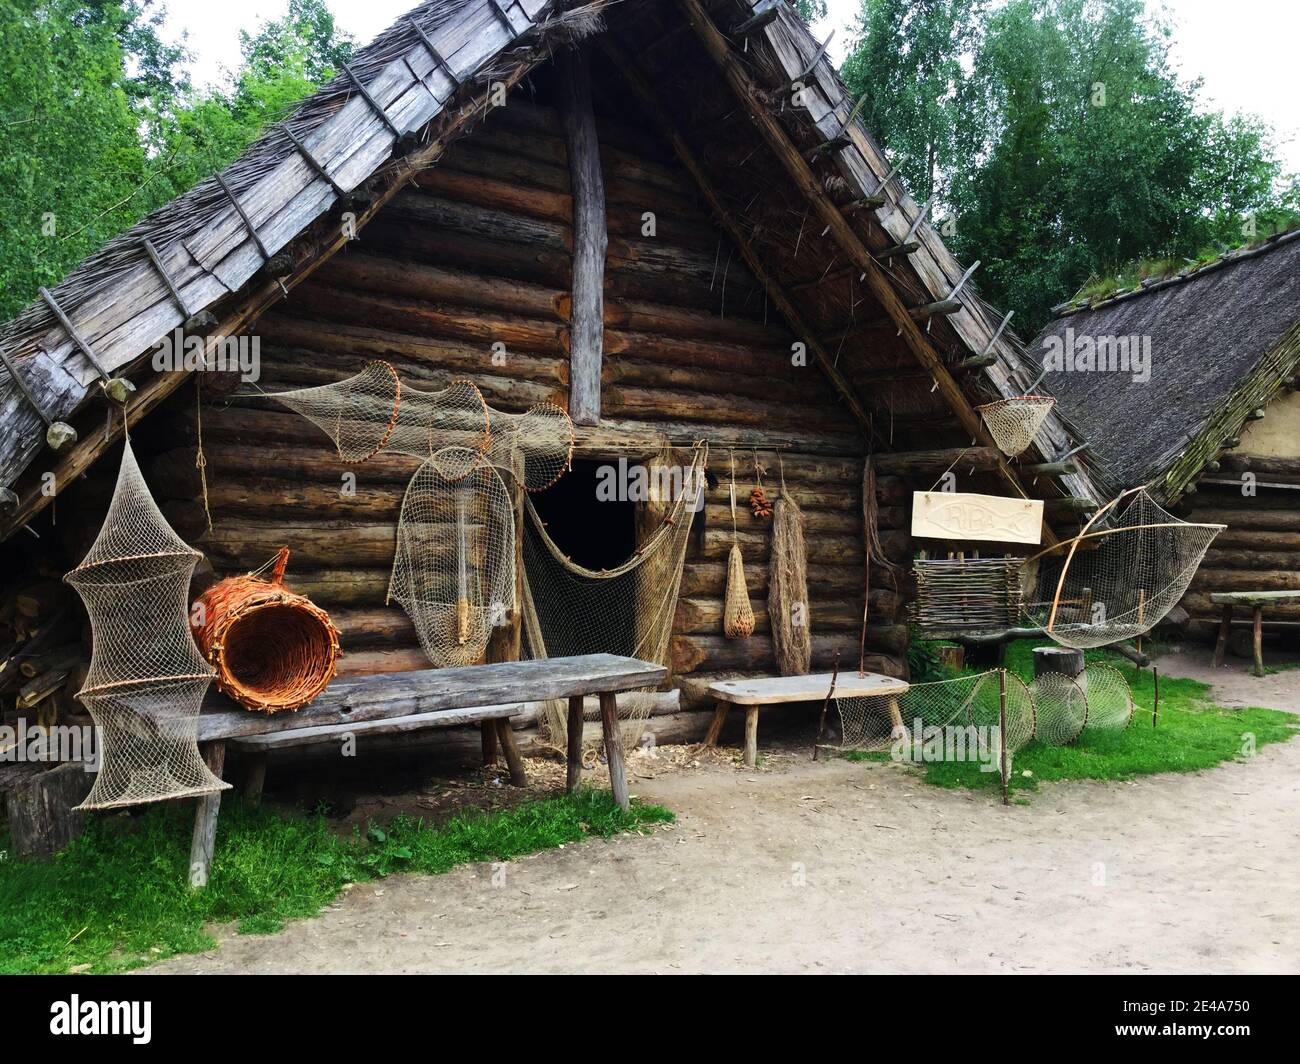 A replica of a historic fisherman's house with drying nets in front of the entrance. Stock Photo